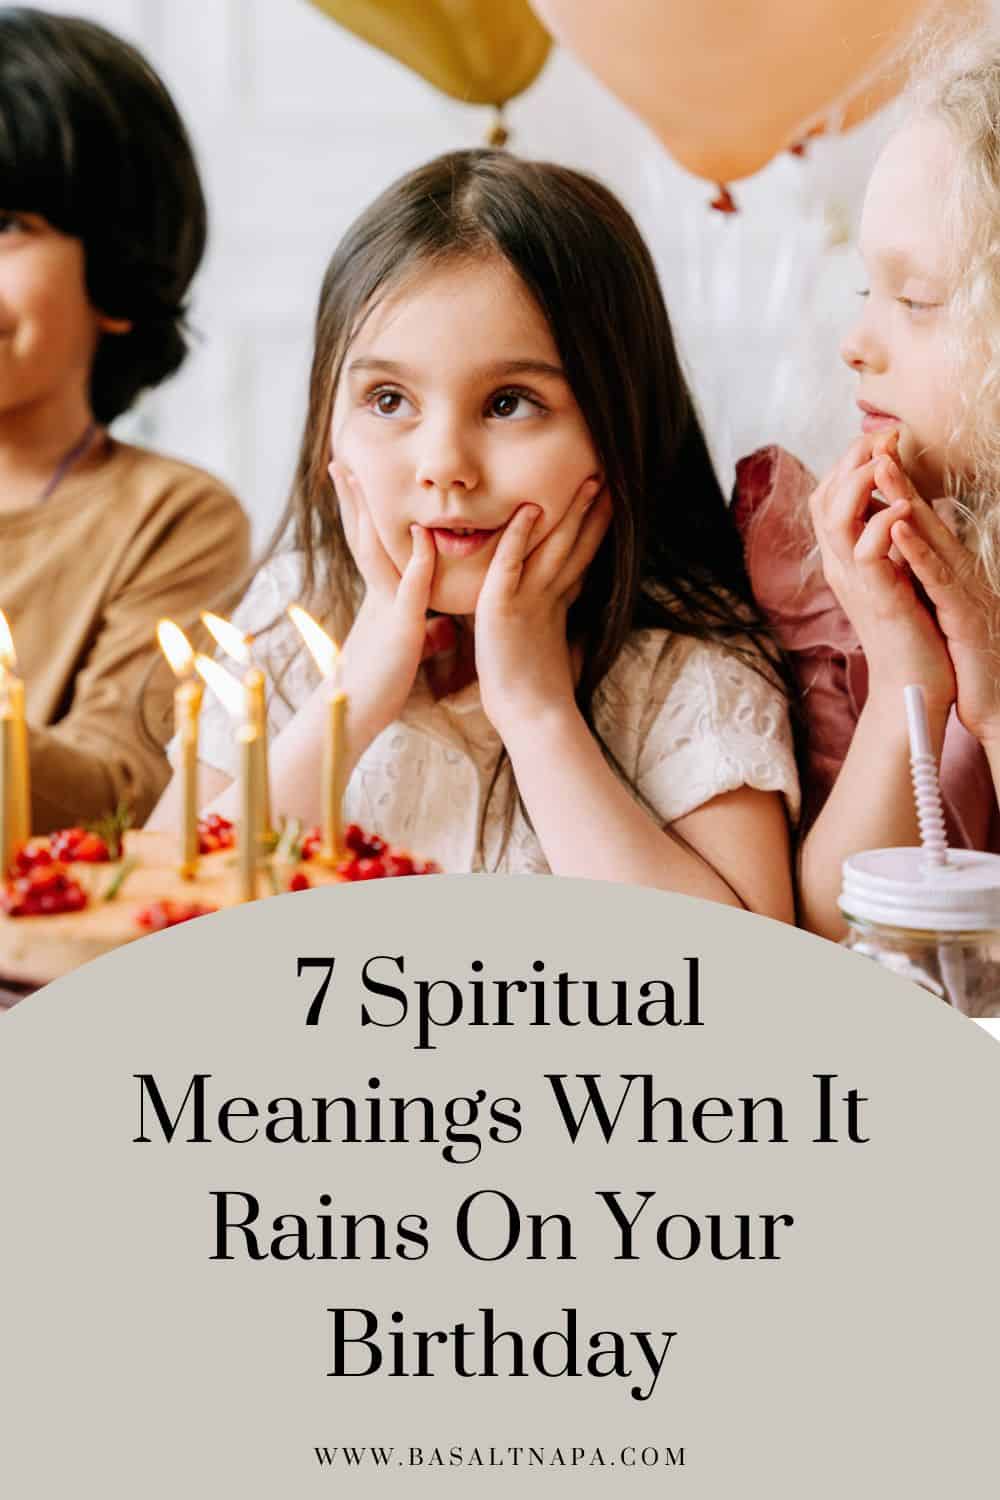 7 Spiritual Meanings When It Rains On Your Birthday